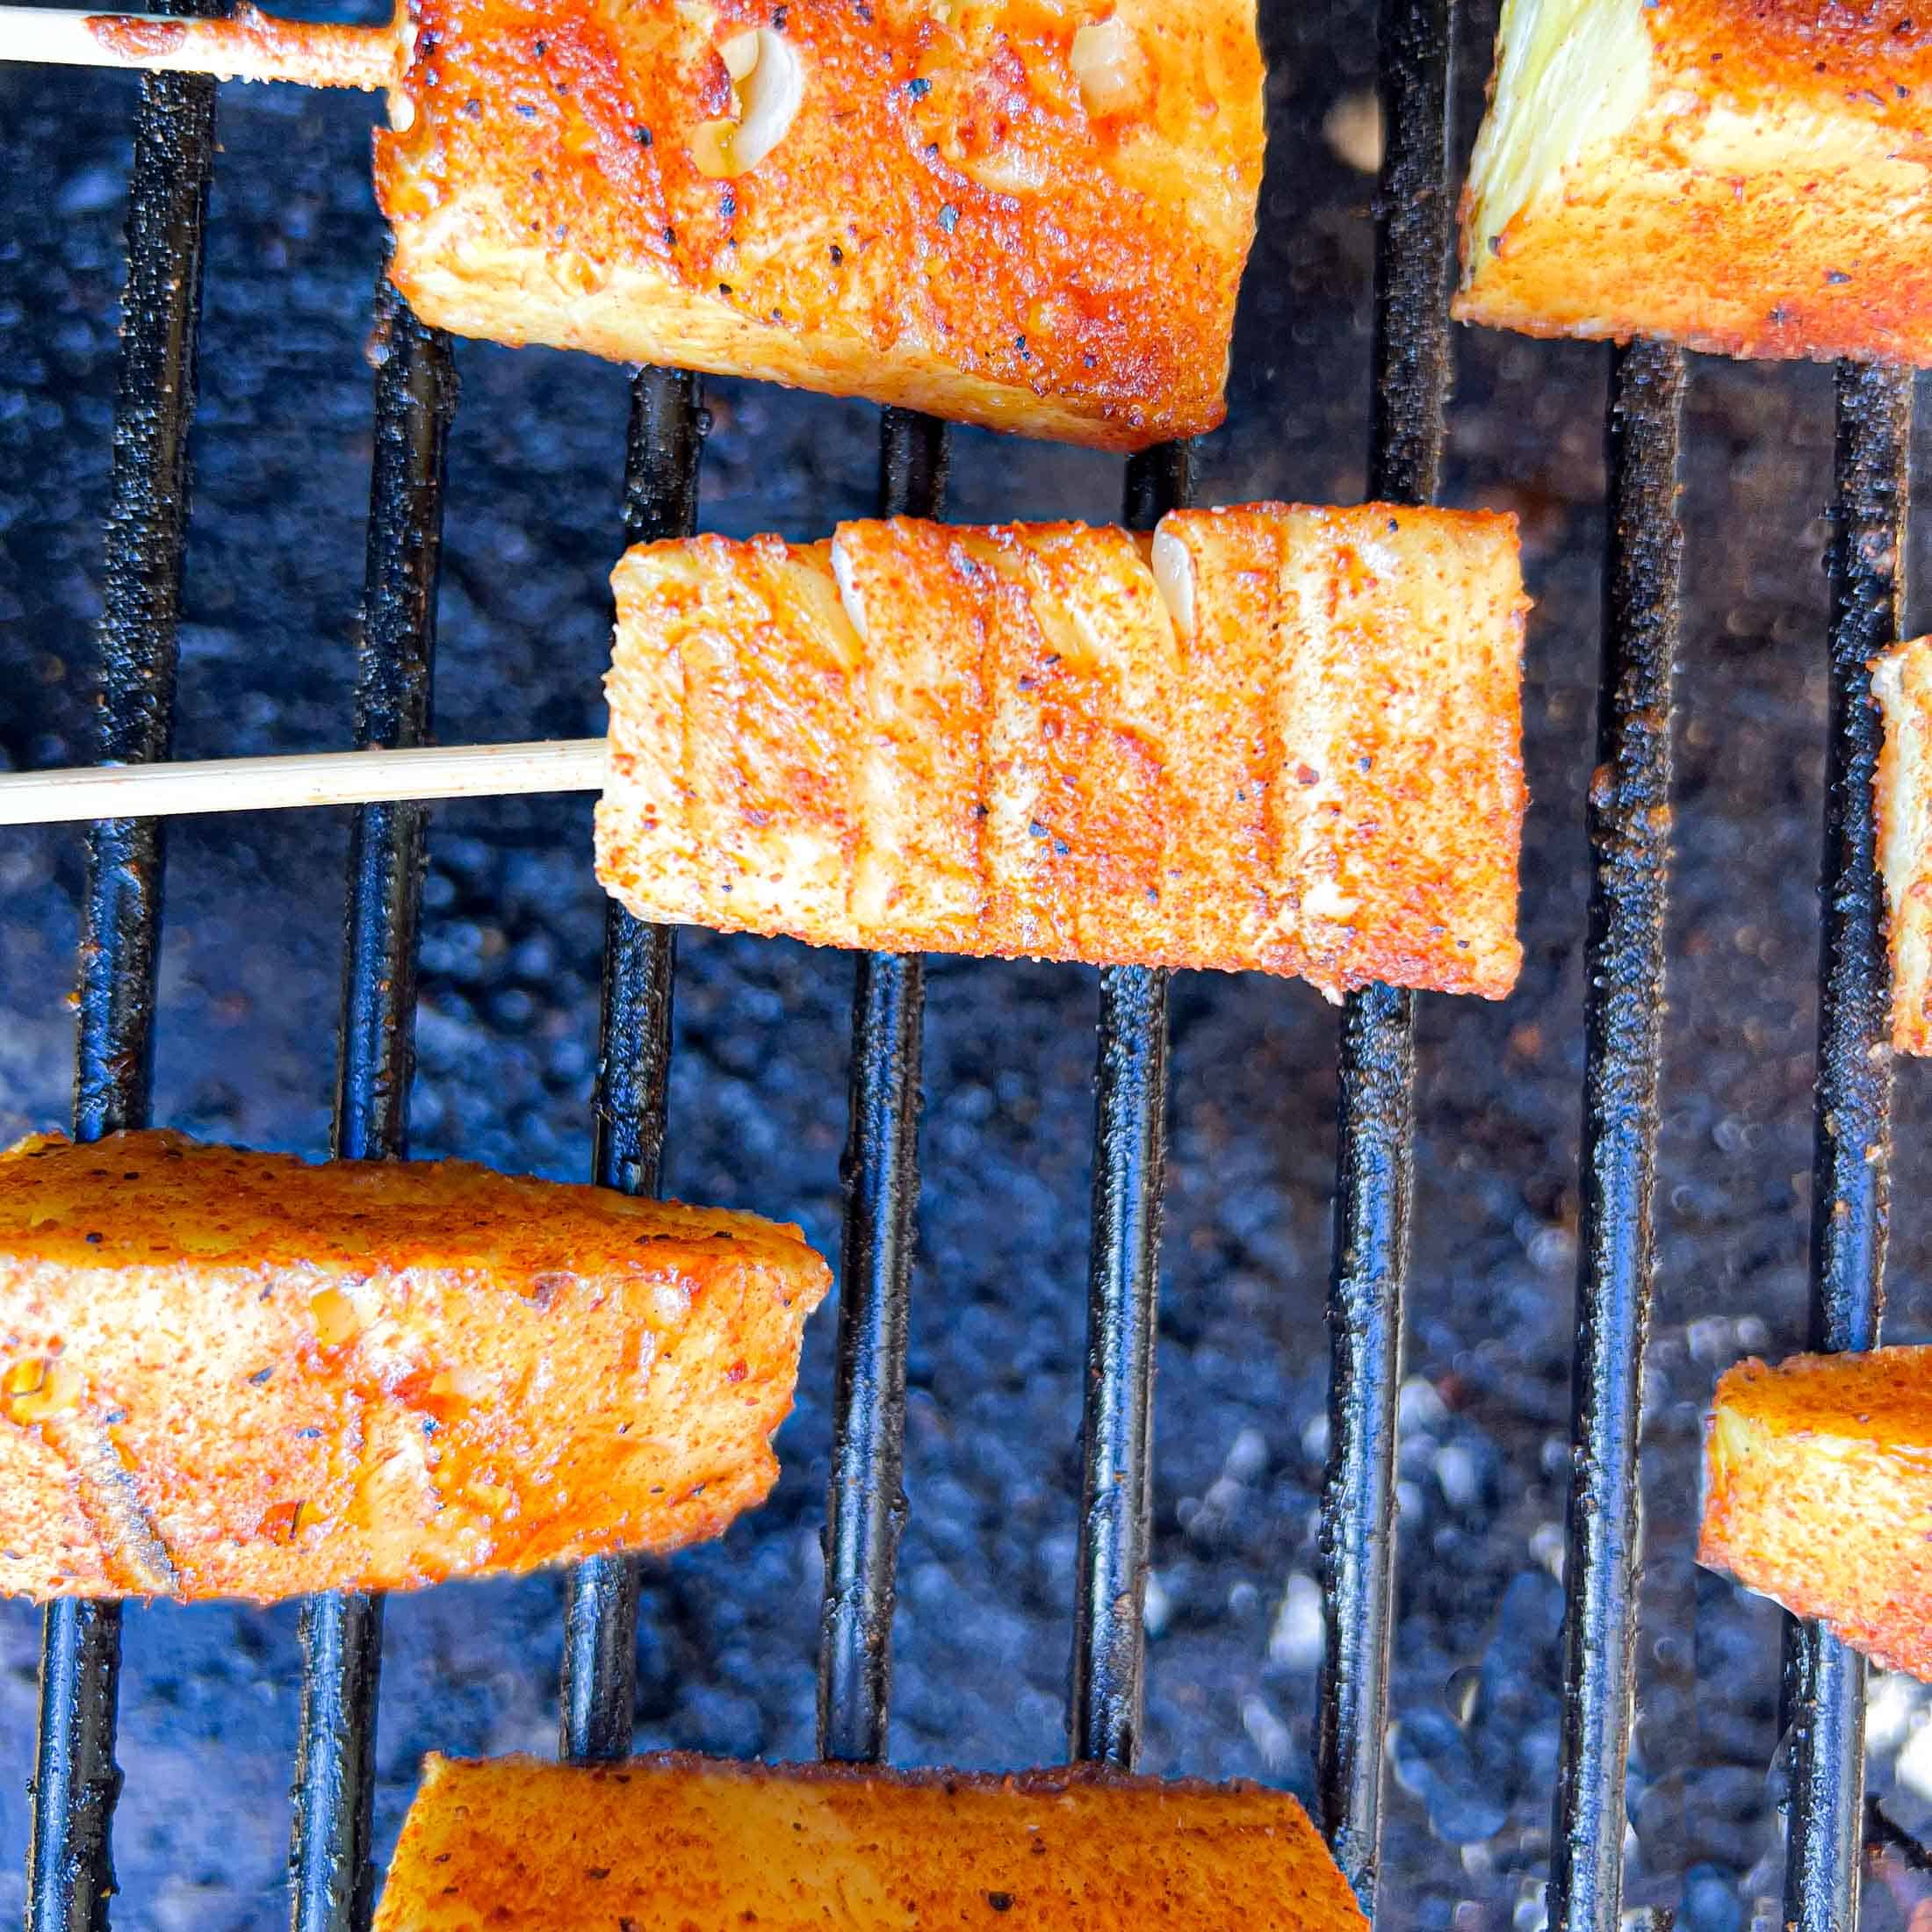 Pineapple on grill grates being smoked.